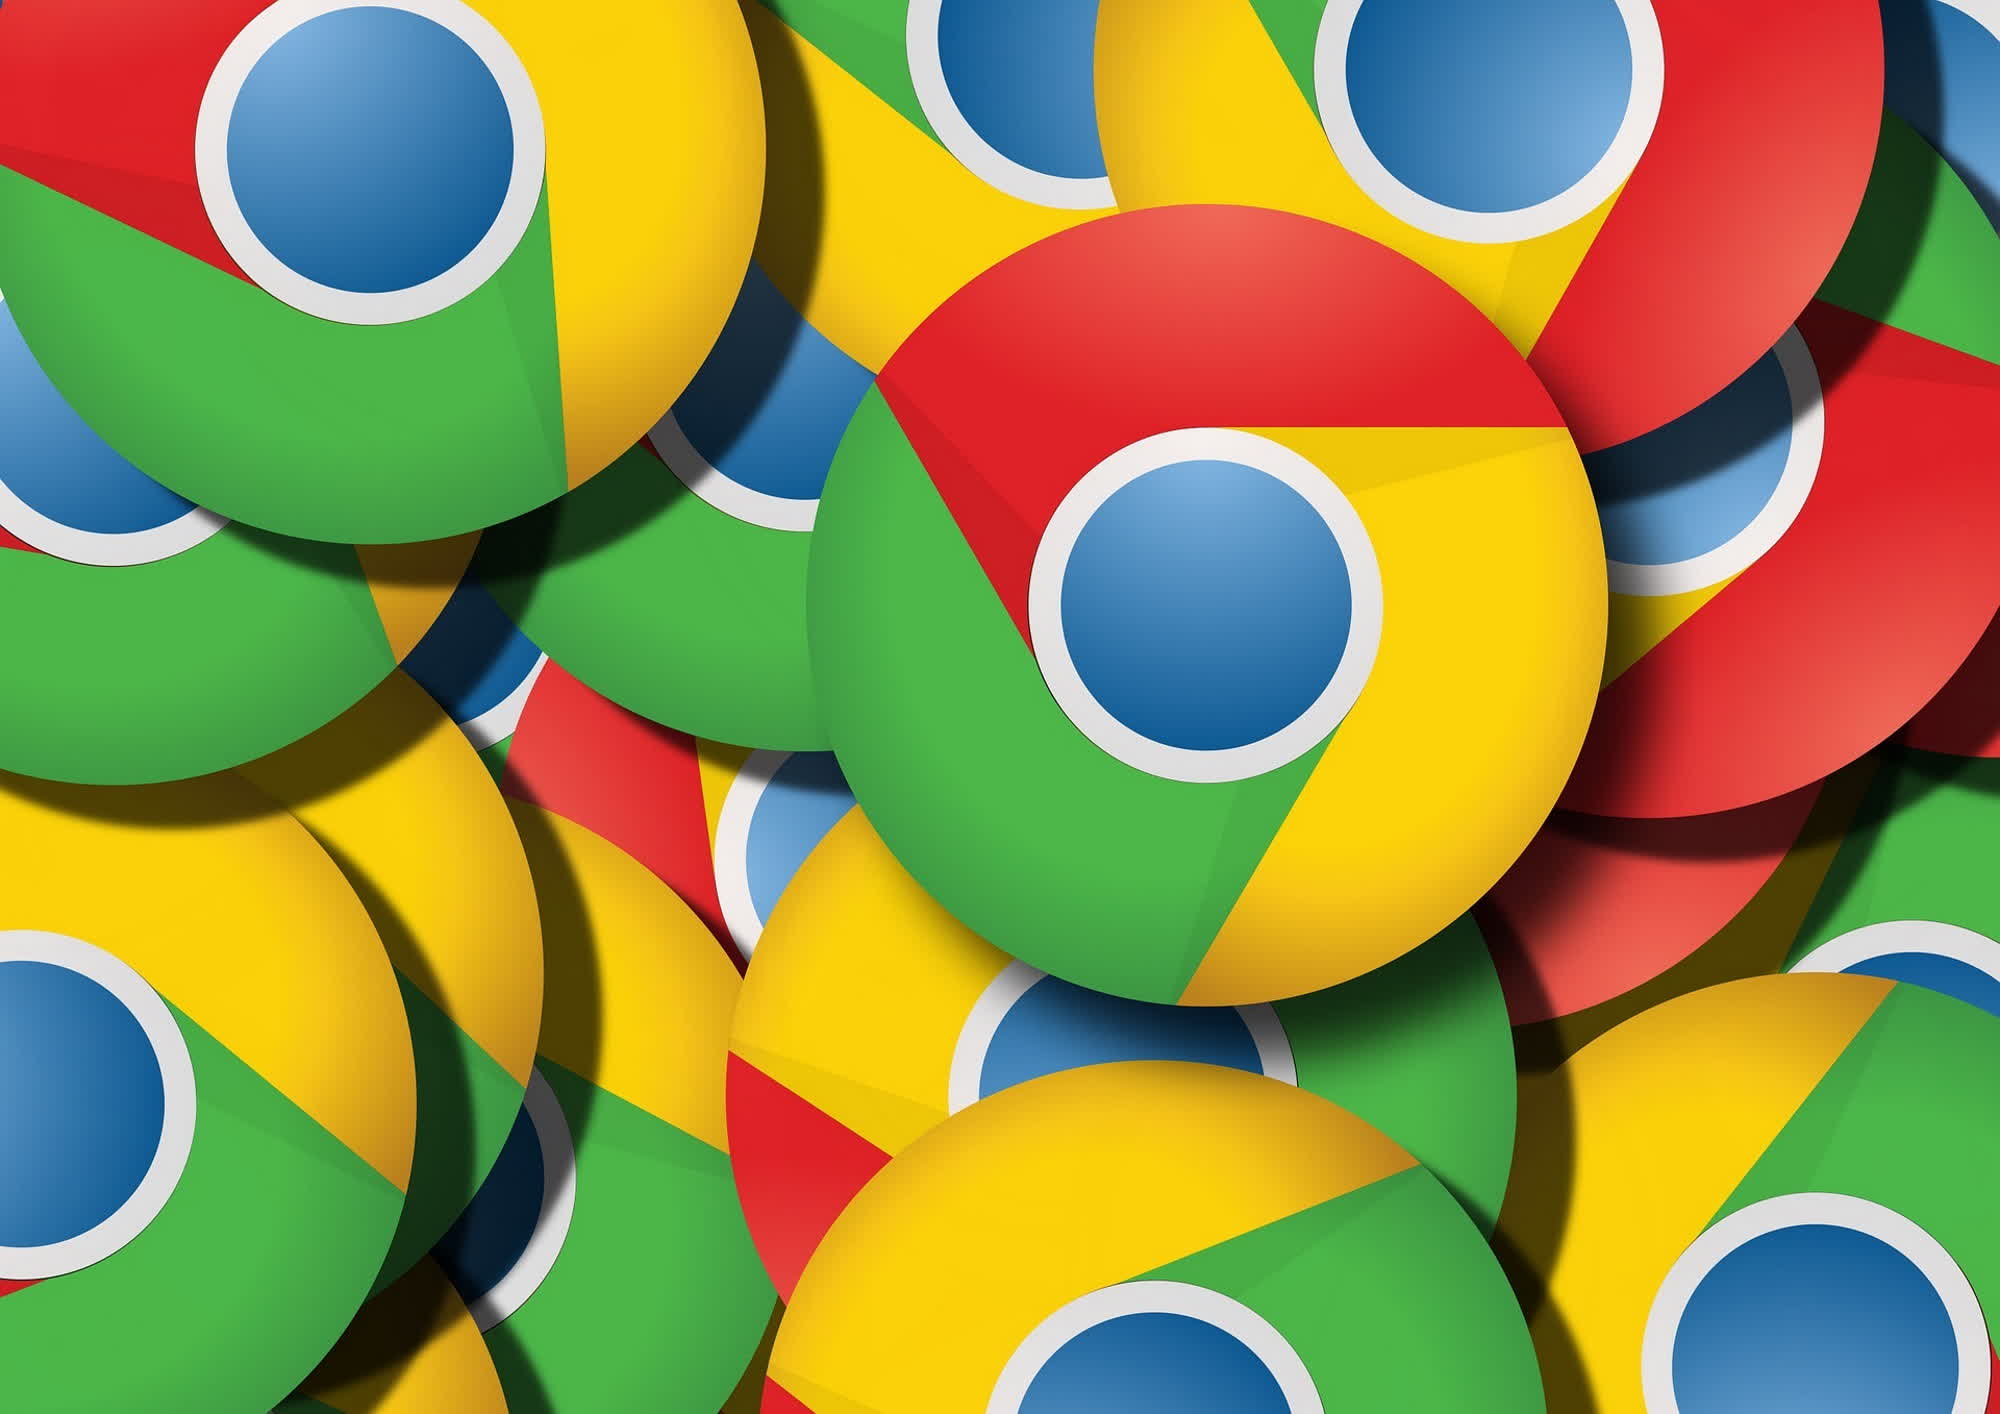 Chrome browser users will be getting weekly security updates soon